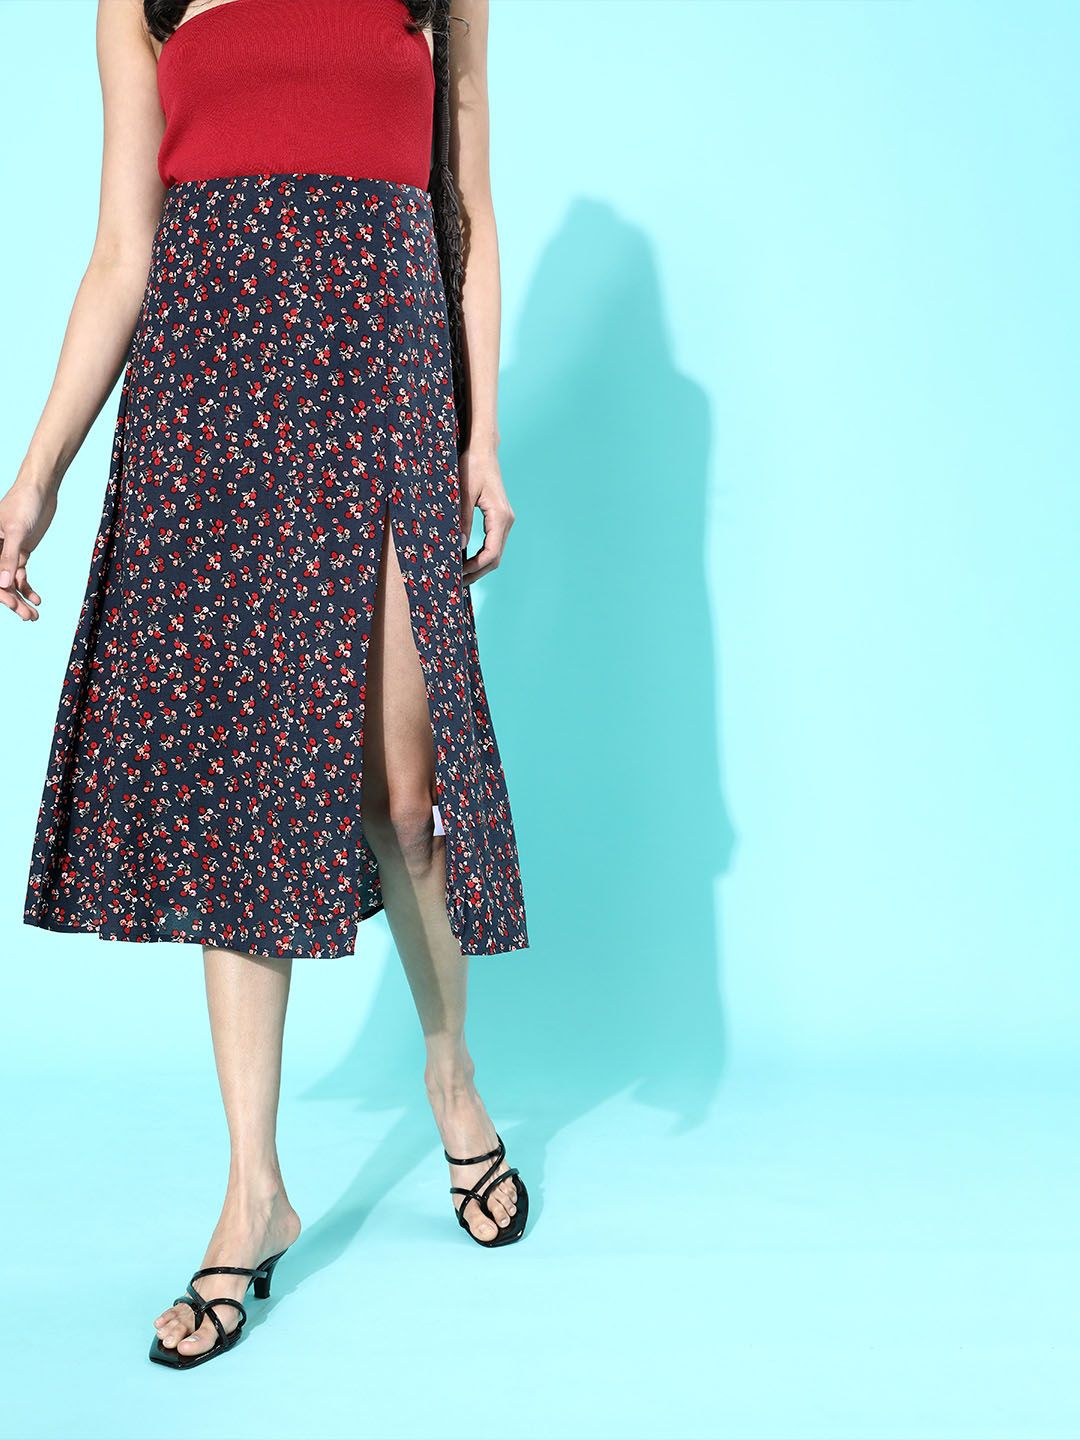 Berrylush Navy Blue Micro or Ditsy Floral Printed Polyester Crepe Casual Midi Flared Skirt Price in India